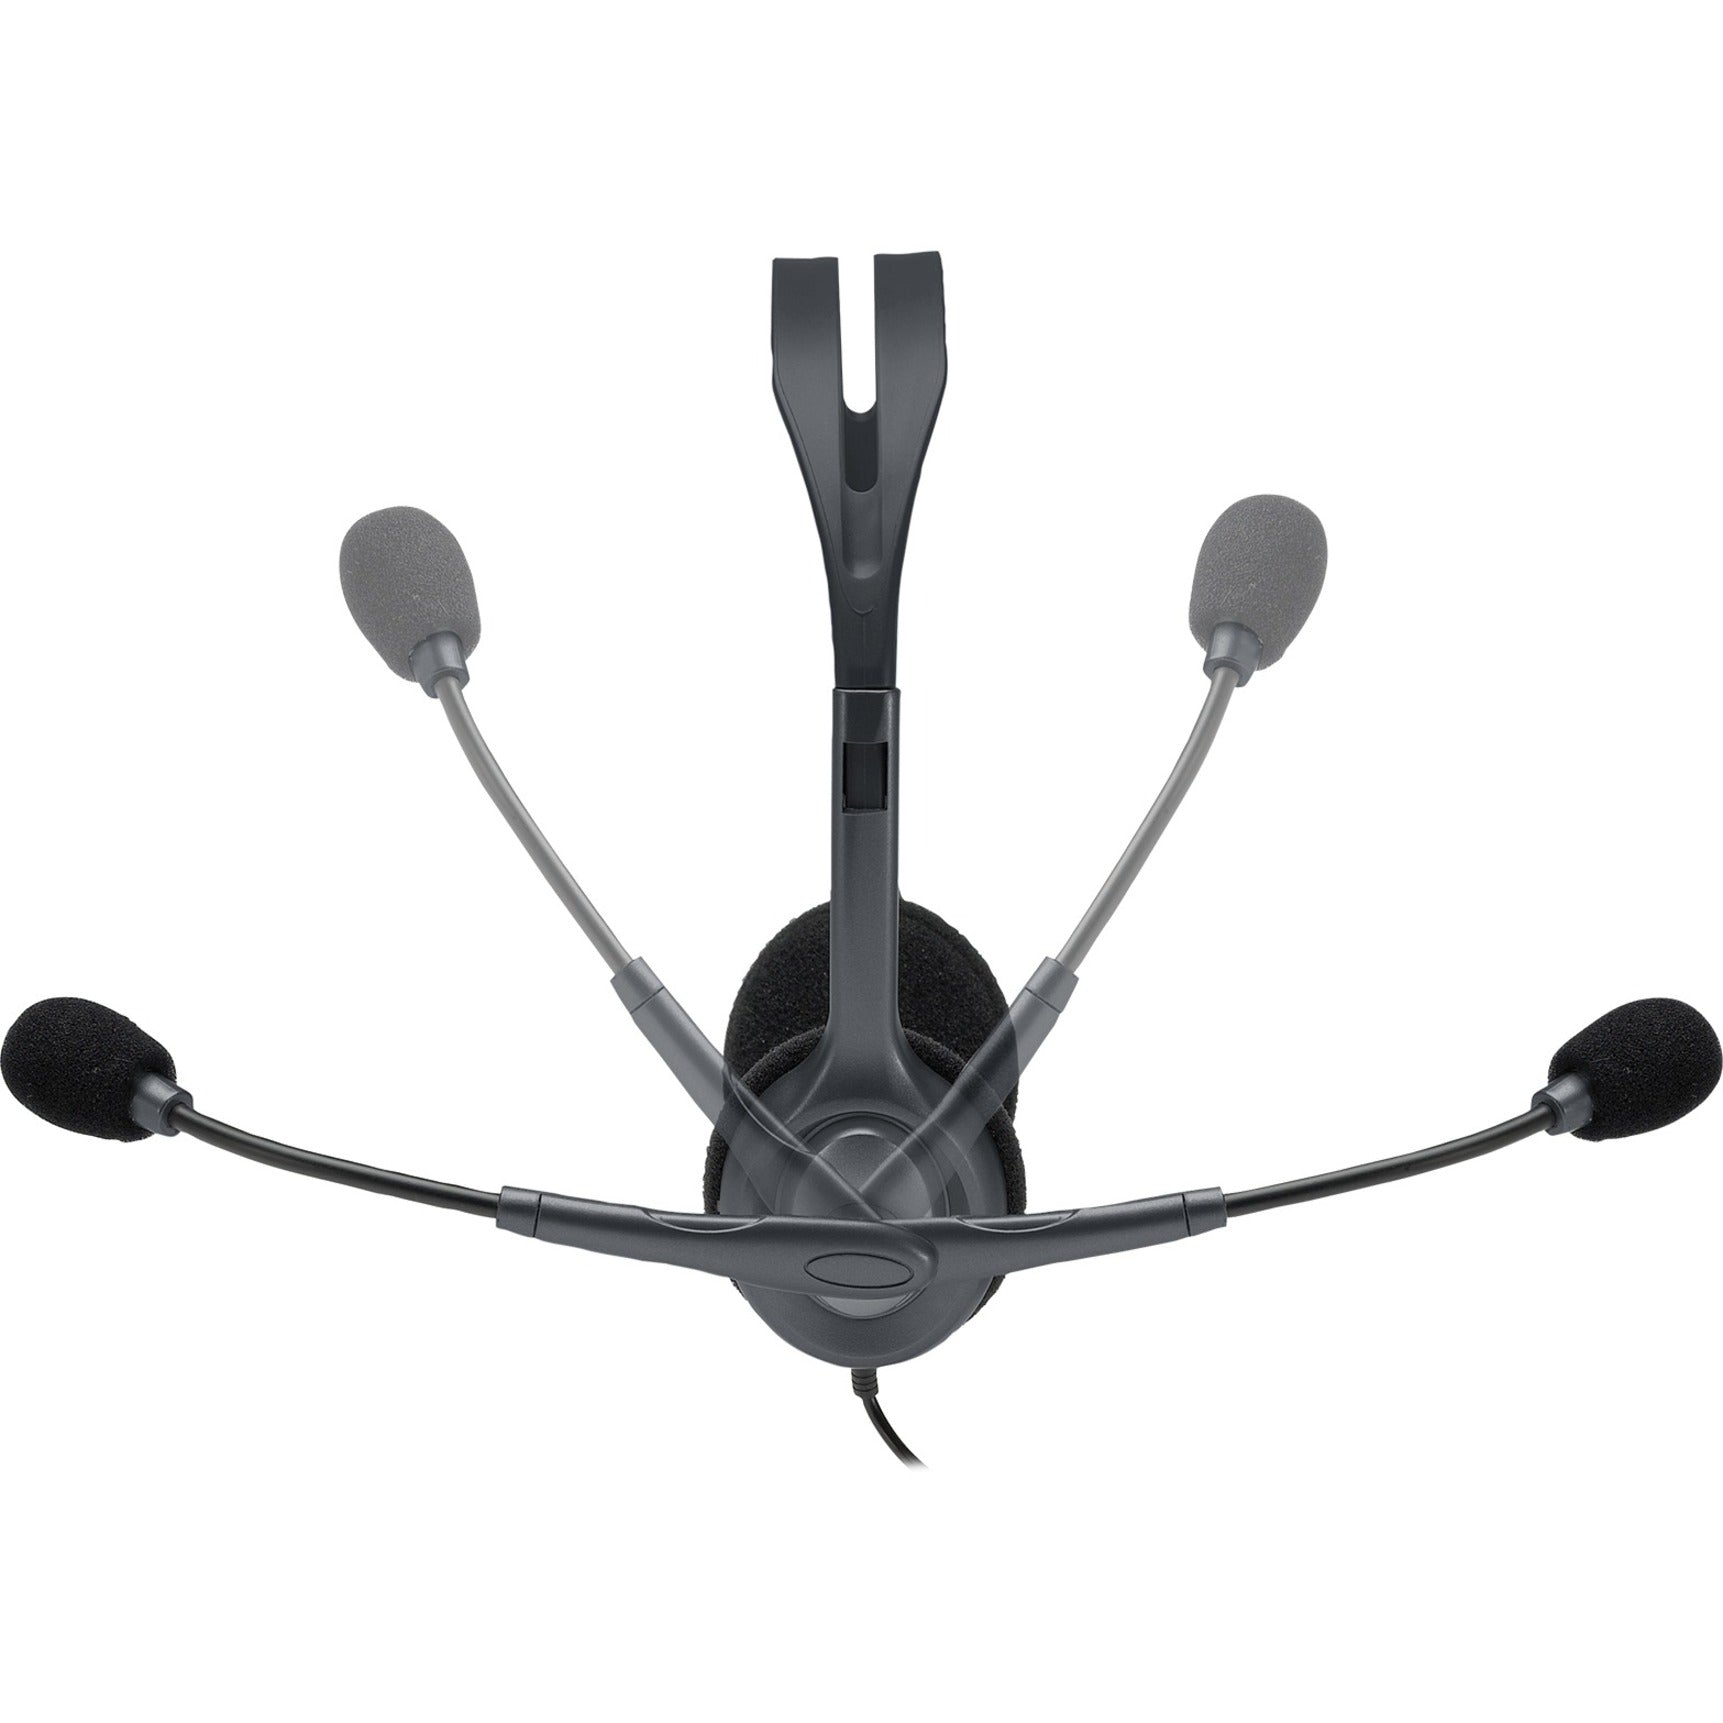 Logitech 981-000612 Stereo Headset H111, Flexible Boom Microphone, Comfortable and Reversible, Wired Over-the-head Headset